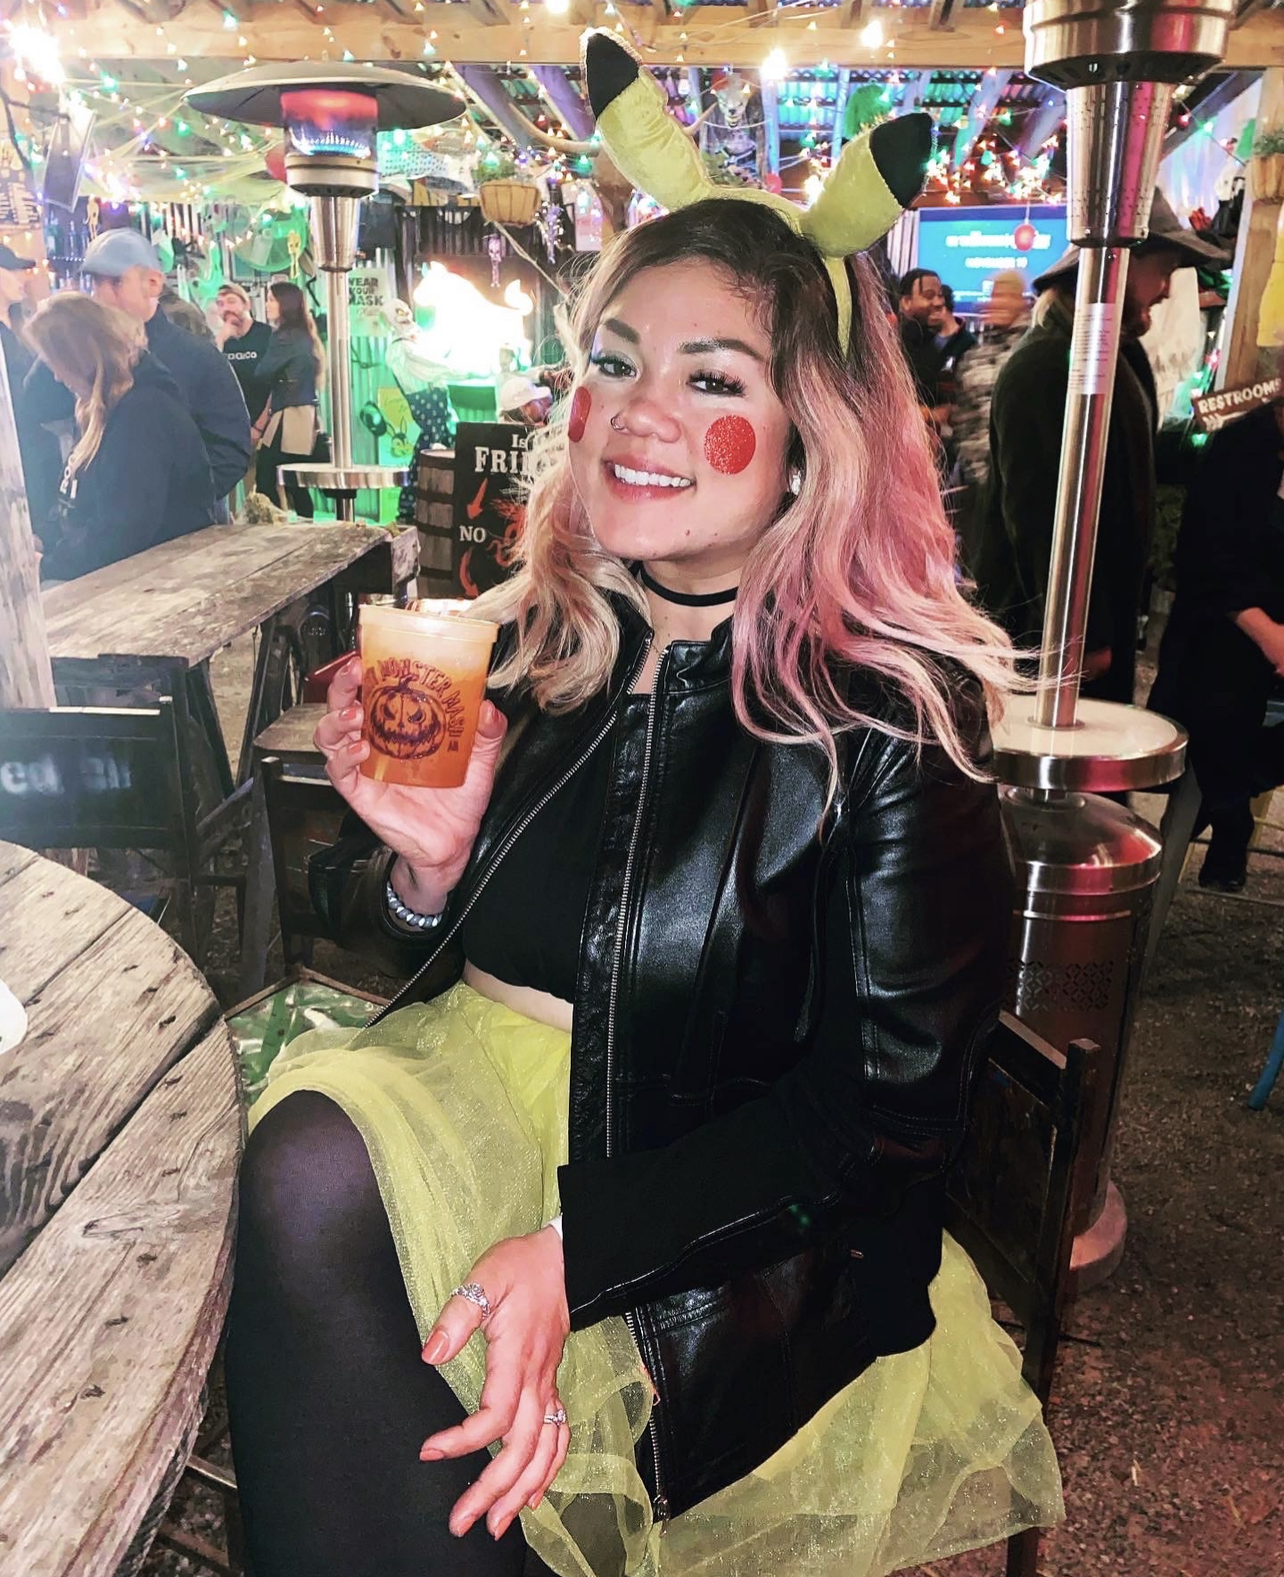 a woman dressed up as Pikachu for Halloween